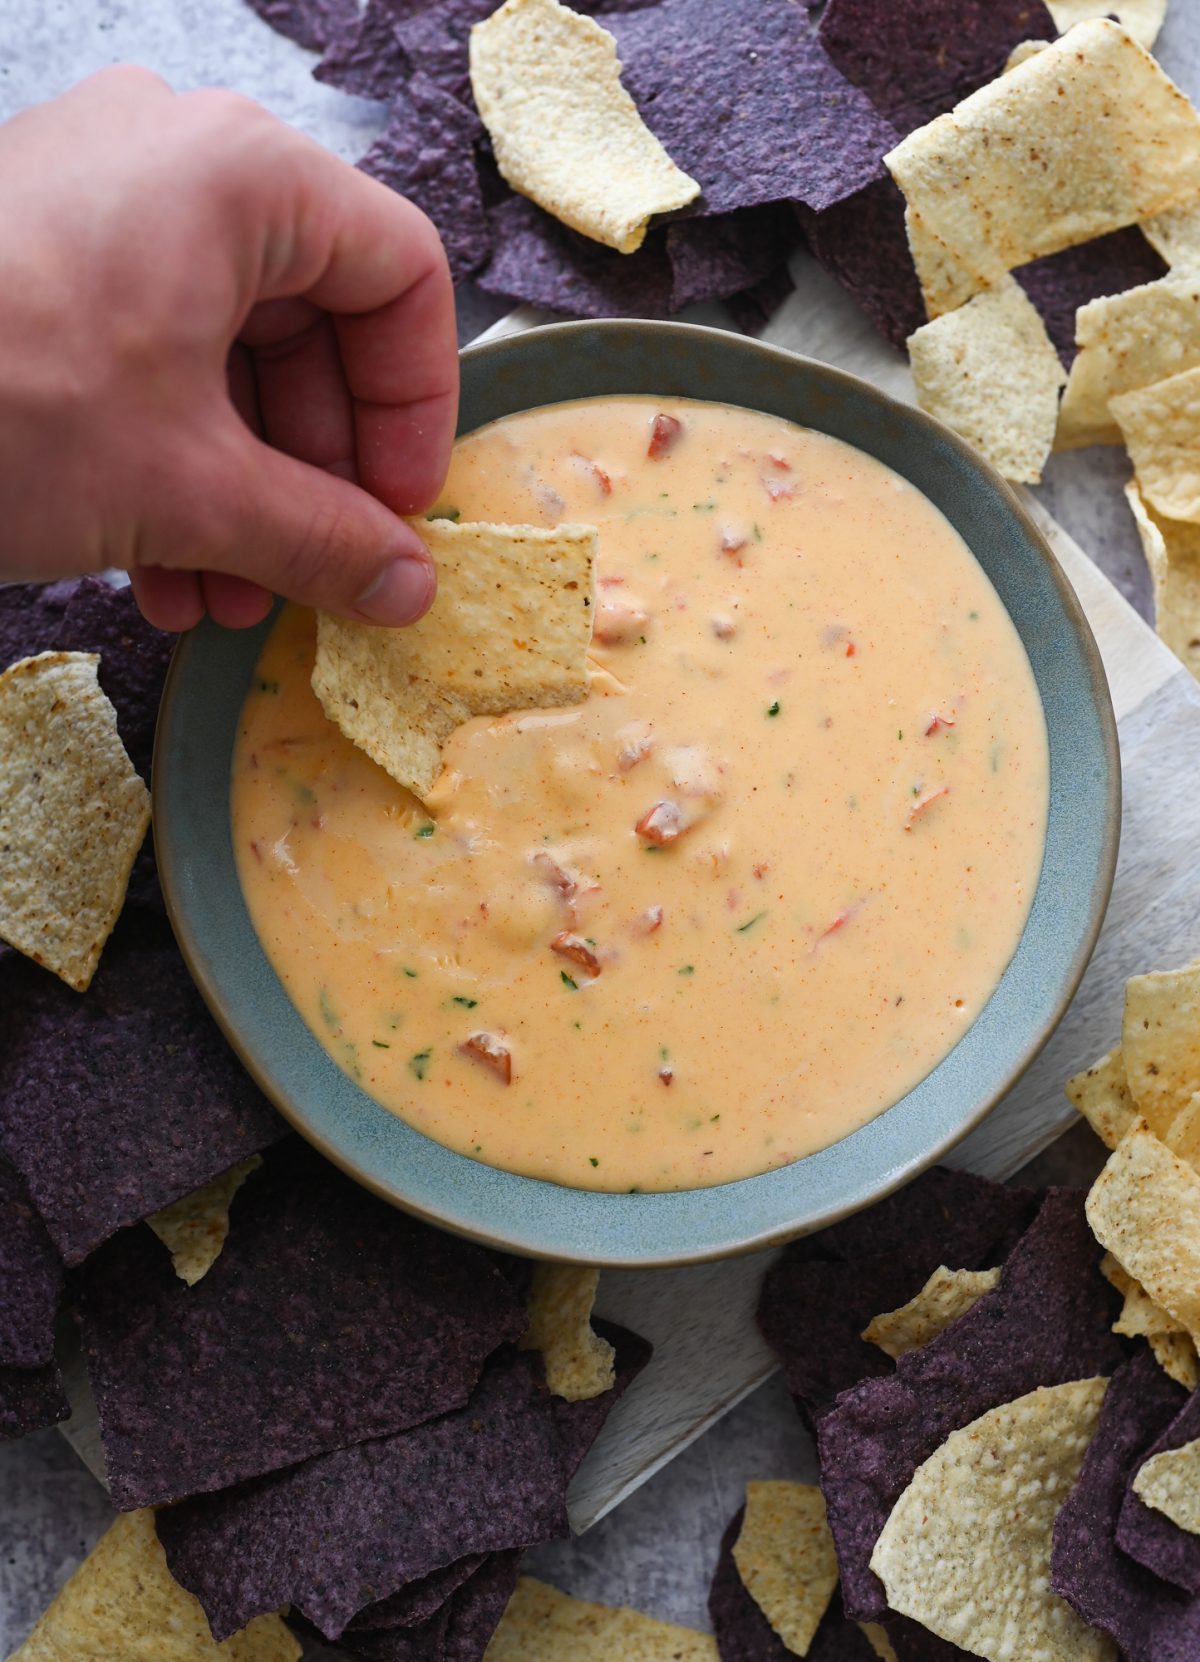 chile con queso with chips on platter